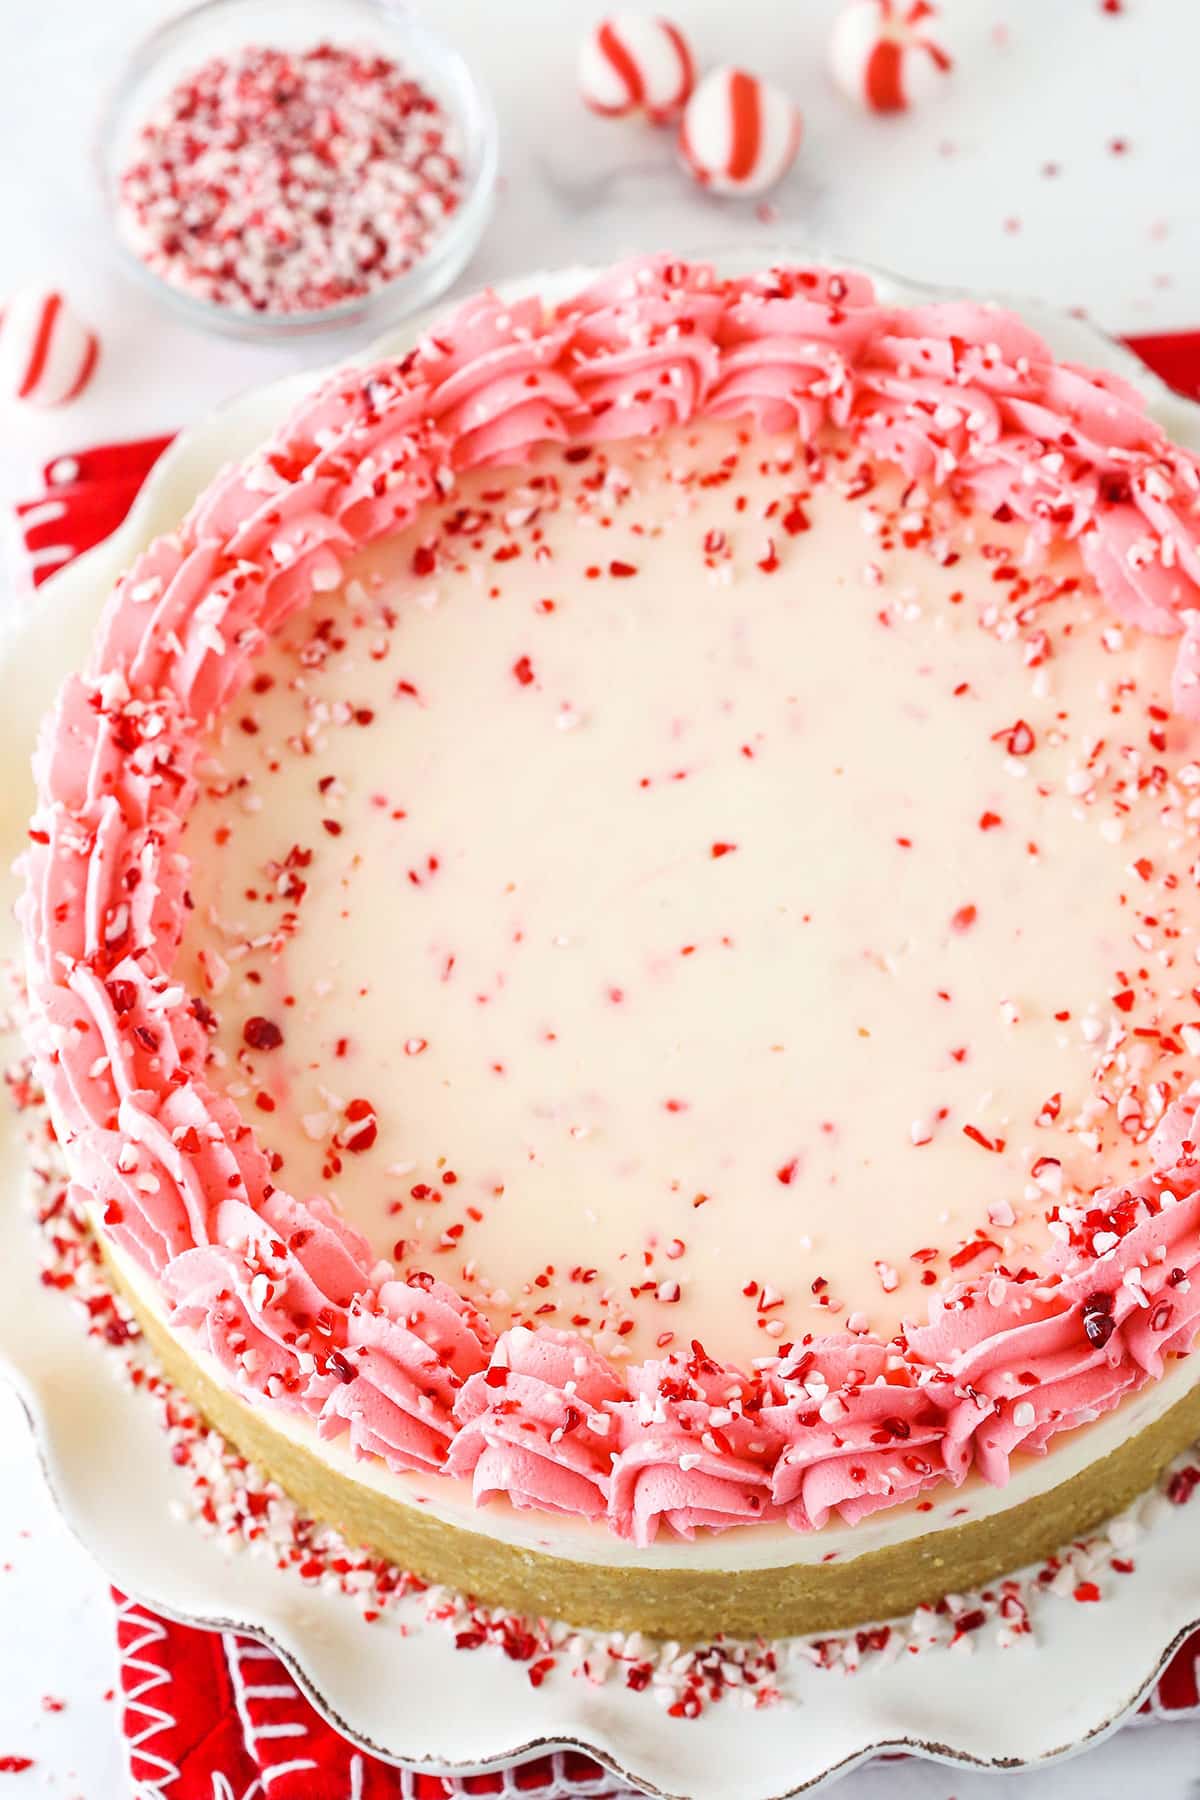 A Decorated Peppermint Cheesecake on a Serving Plate Seen From Above.